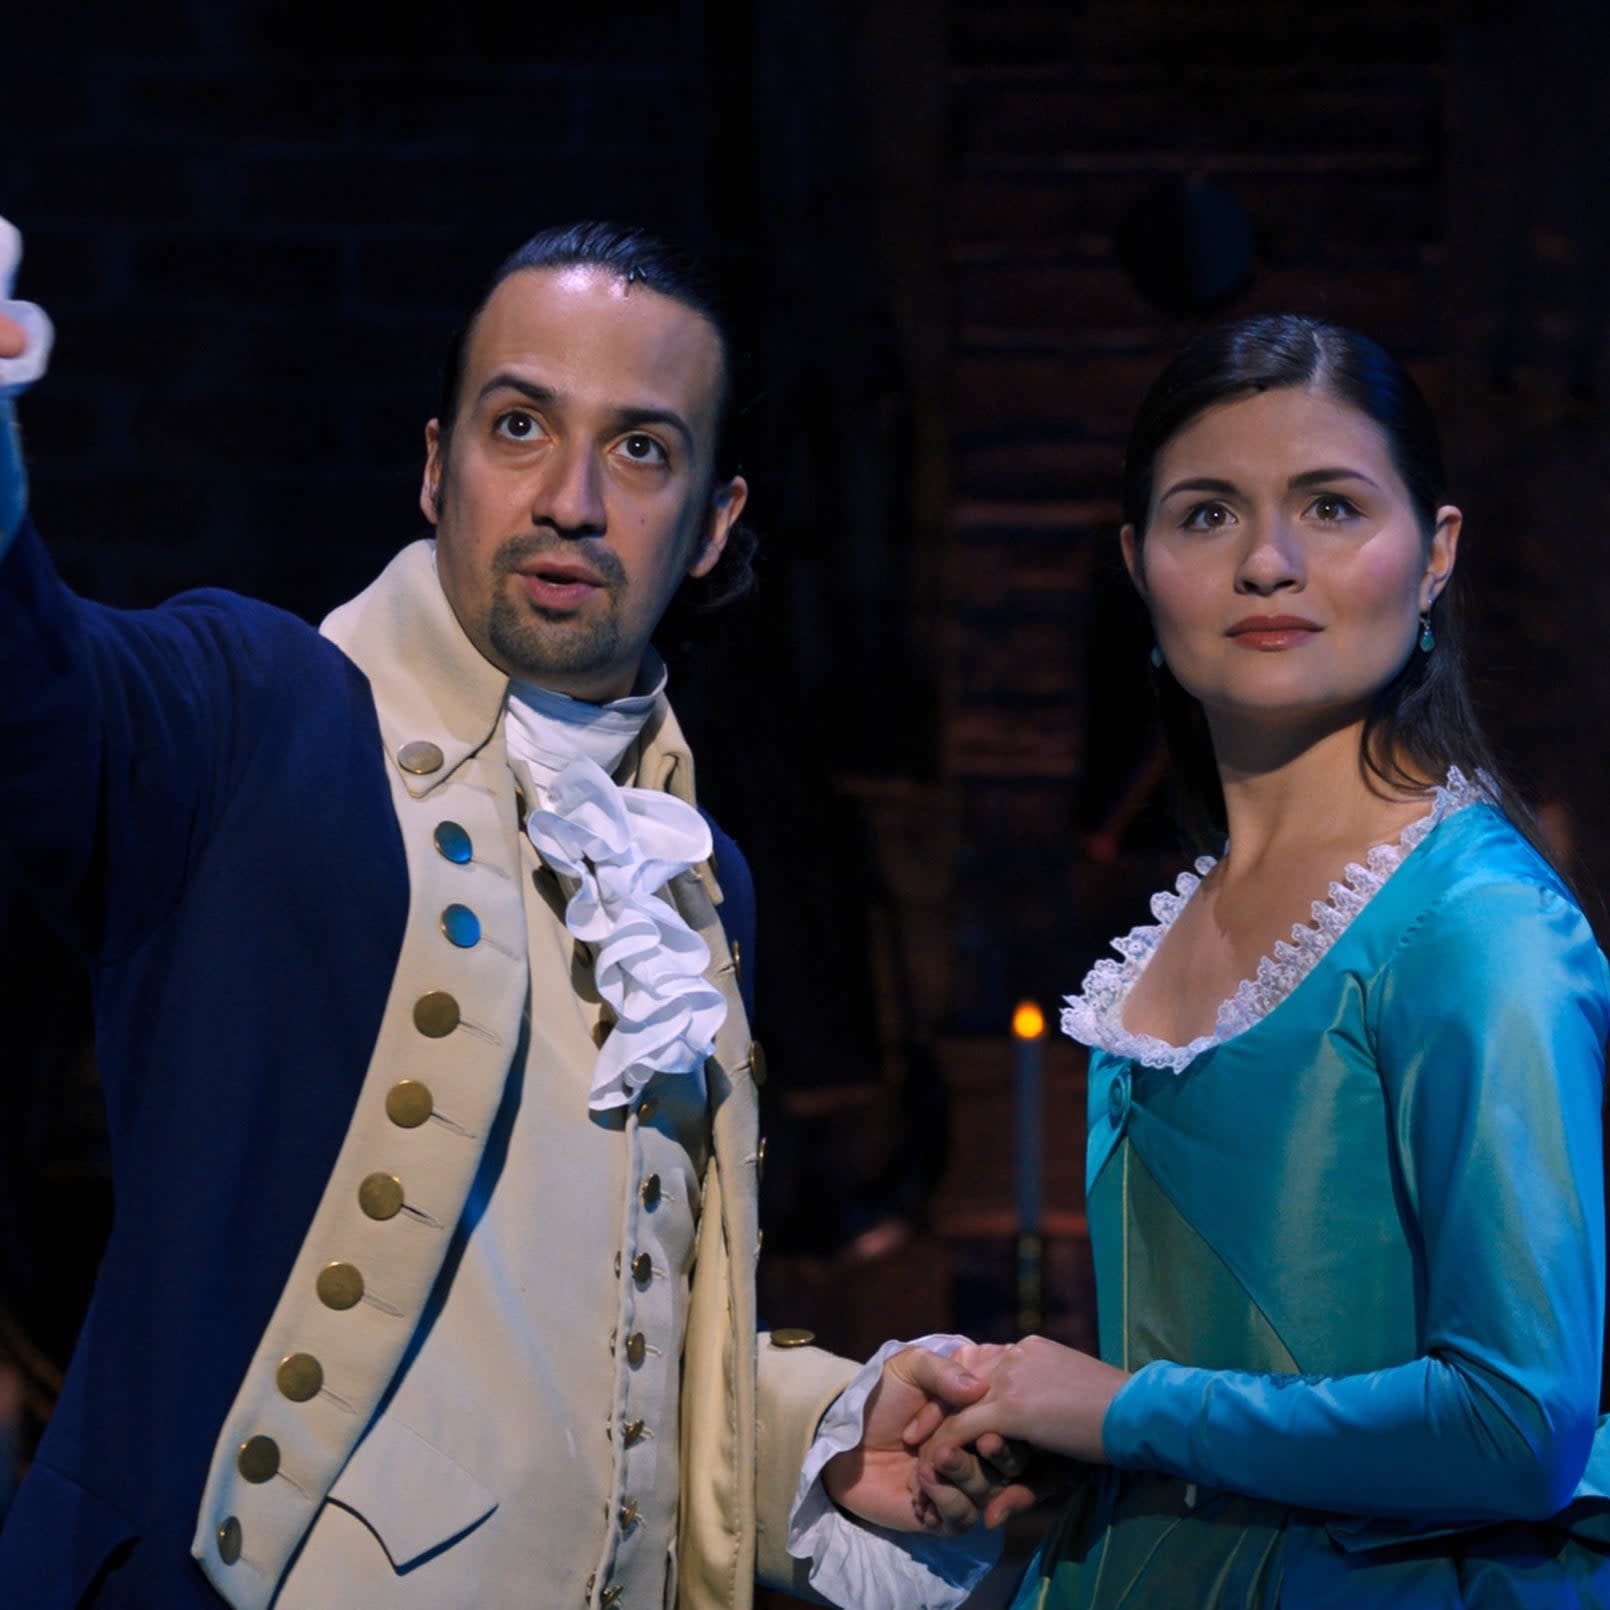 Hamilton Fans Are Divided Over What Elizas Gasp Means At The End